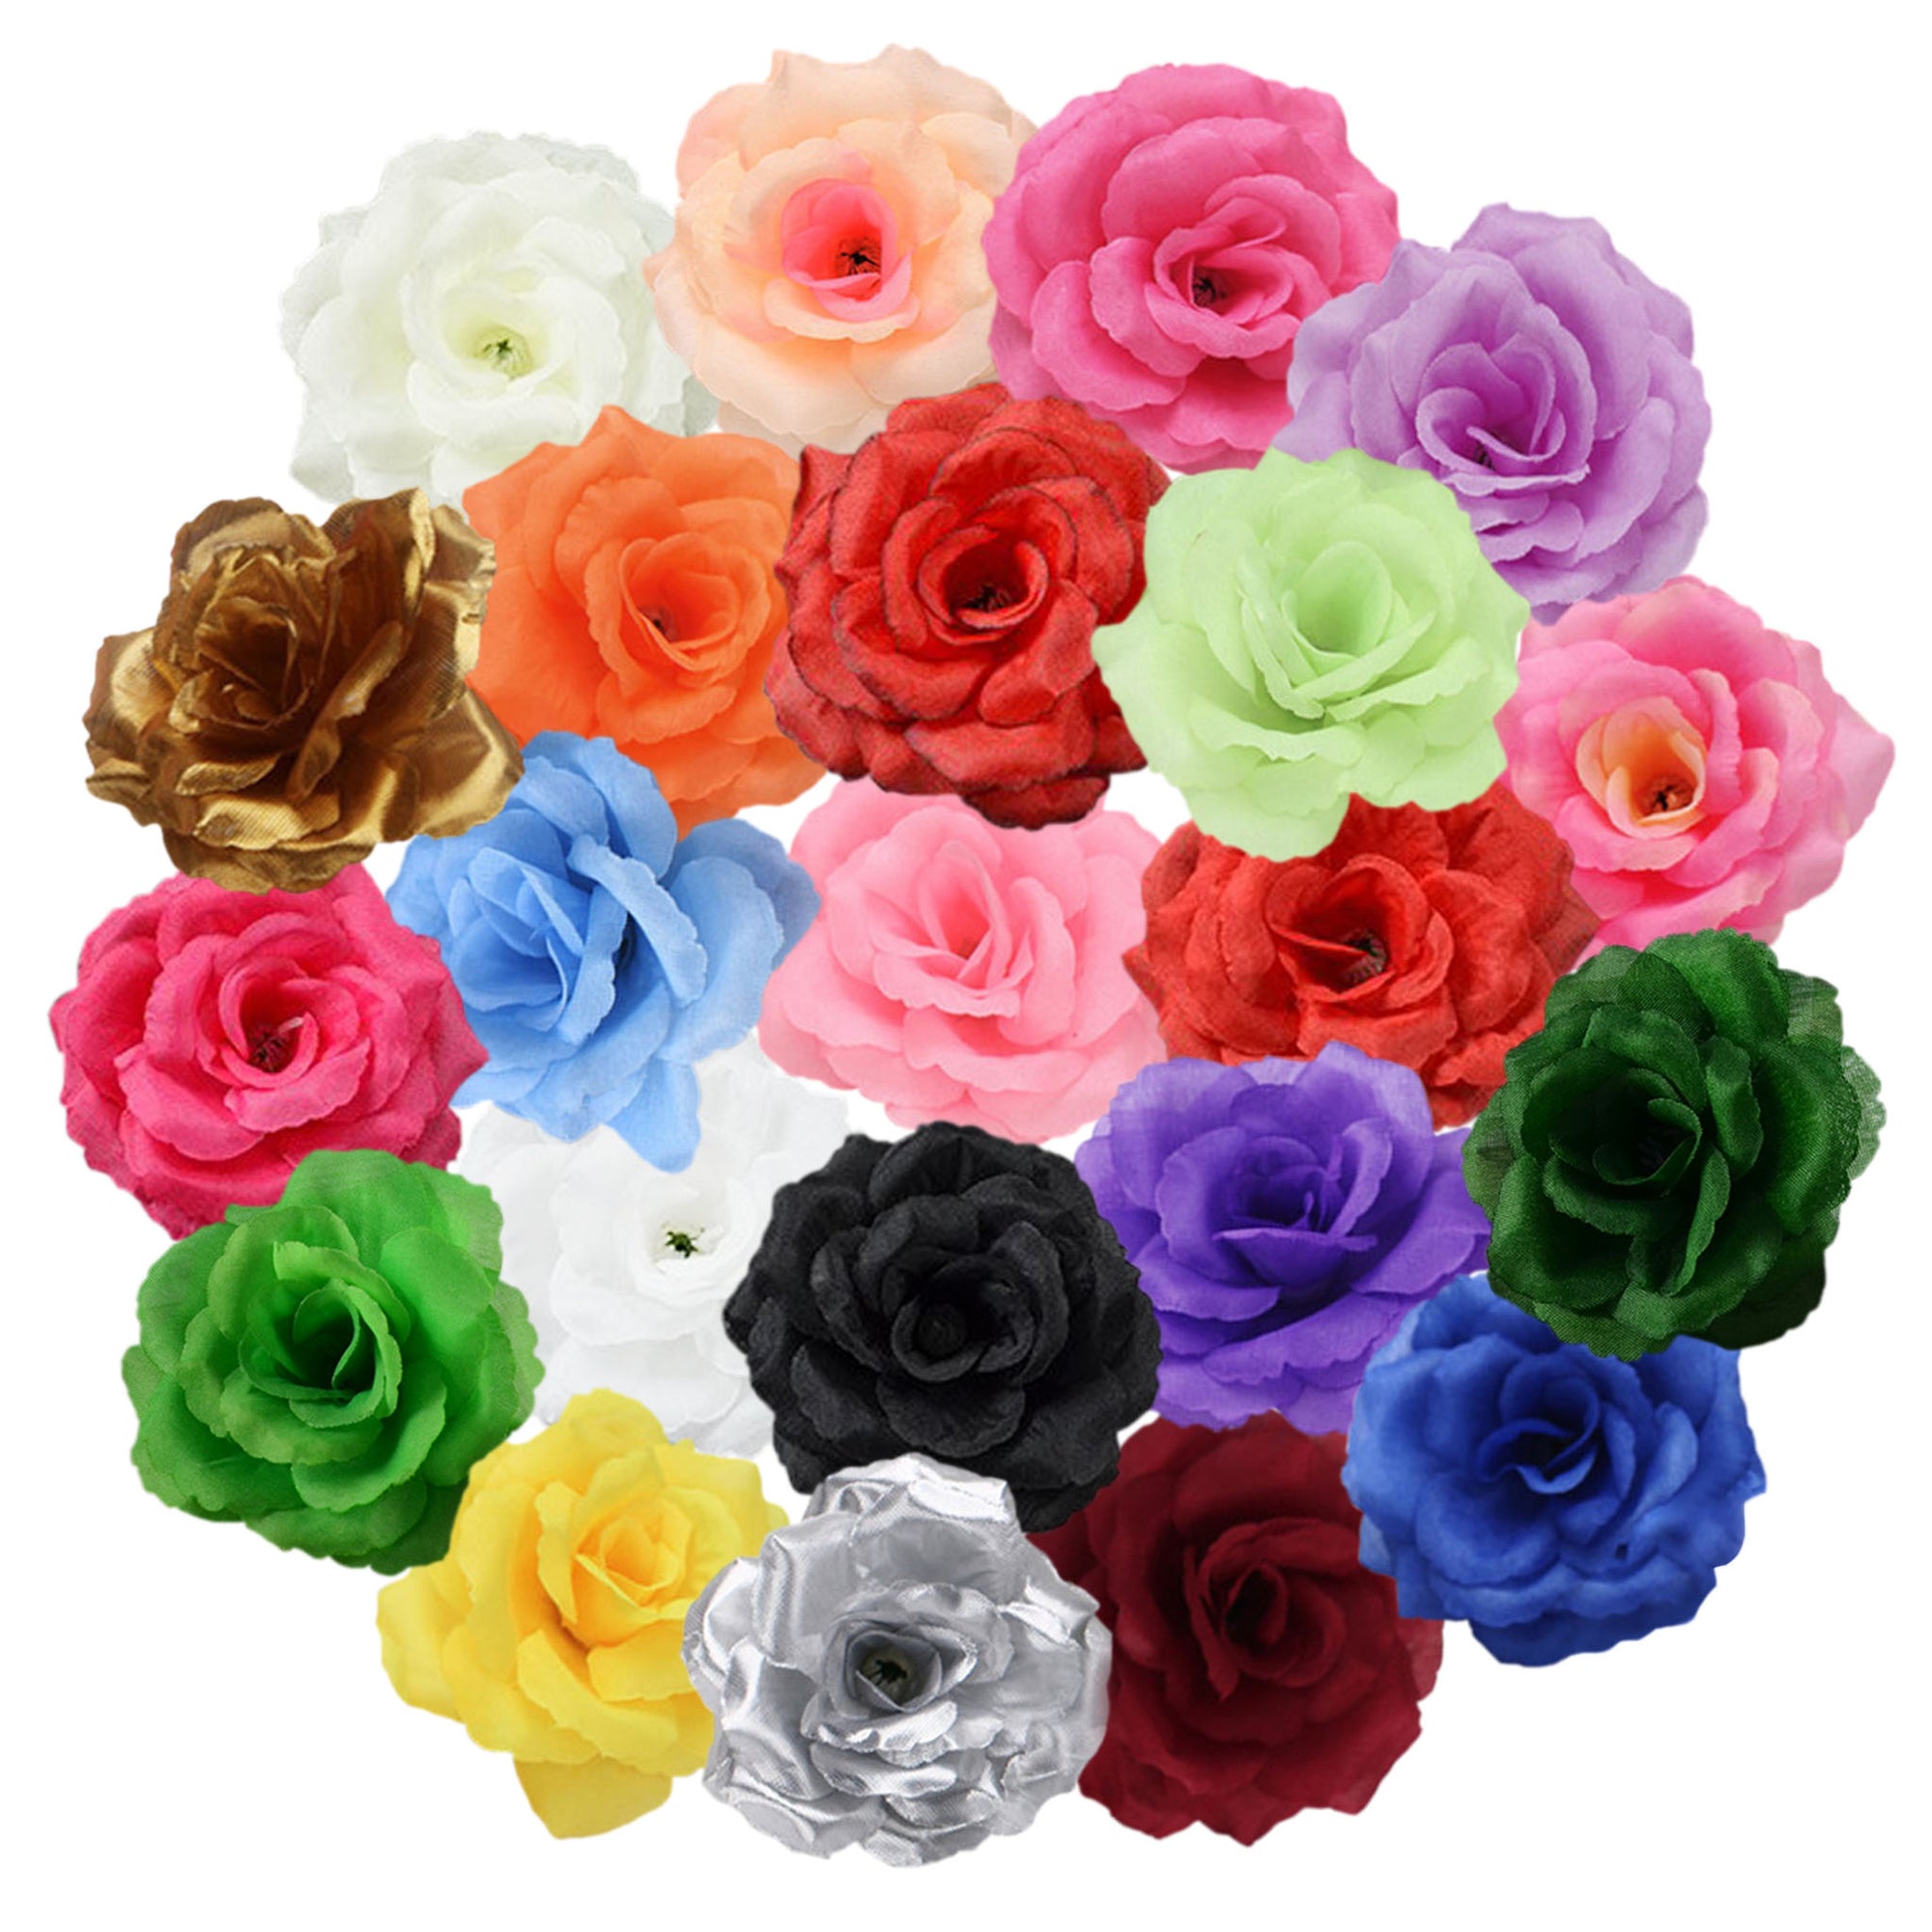 Wholesale Silk Flower Heads Artificial Roses 3 inch 100 Flowers For Flower Ball DIY